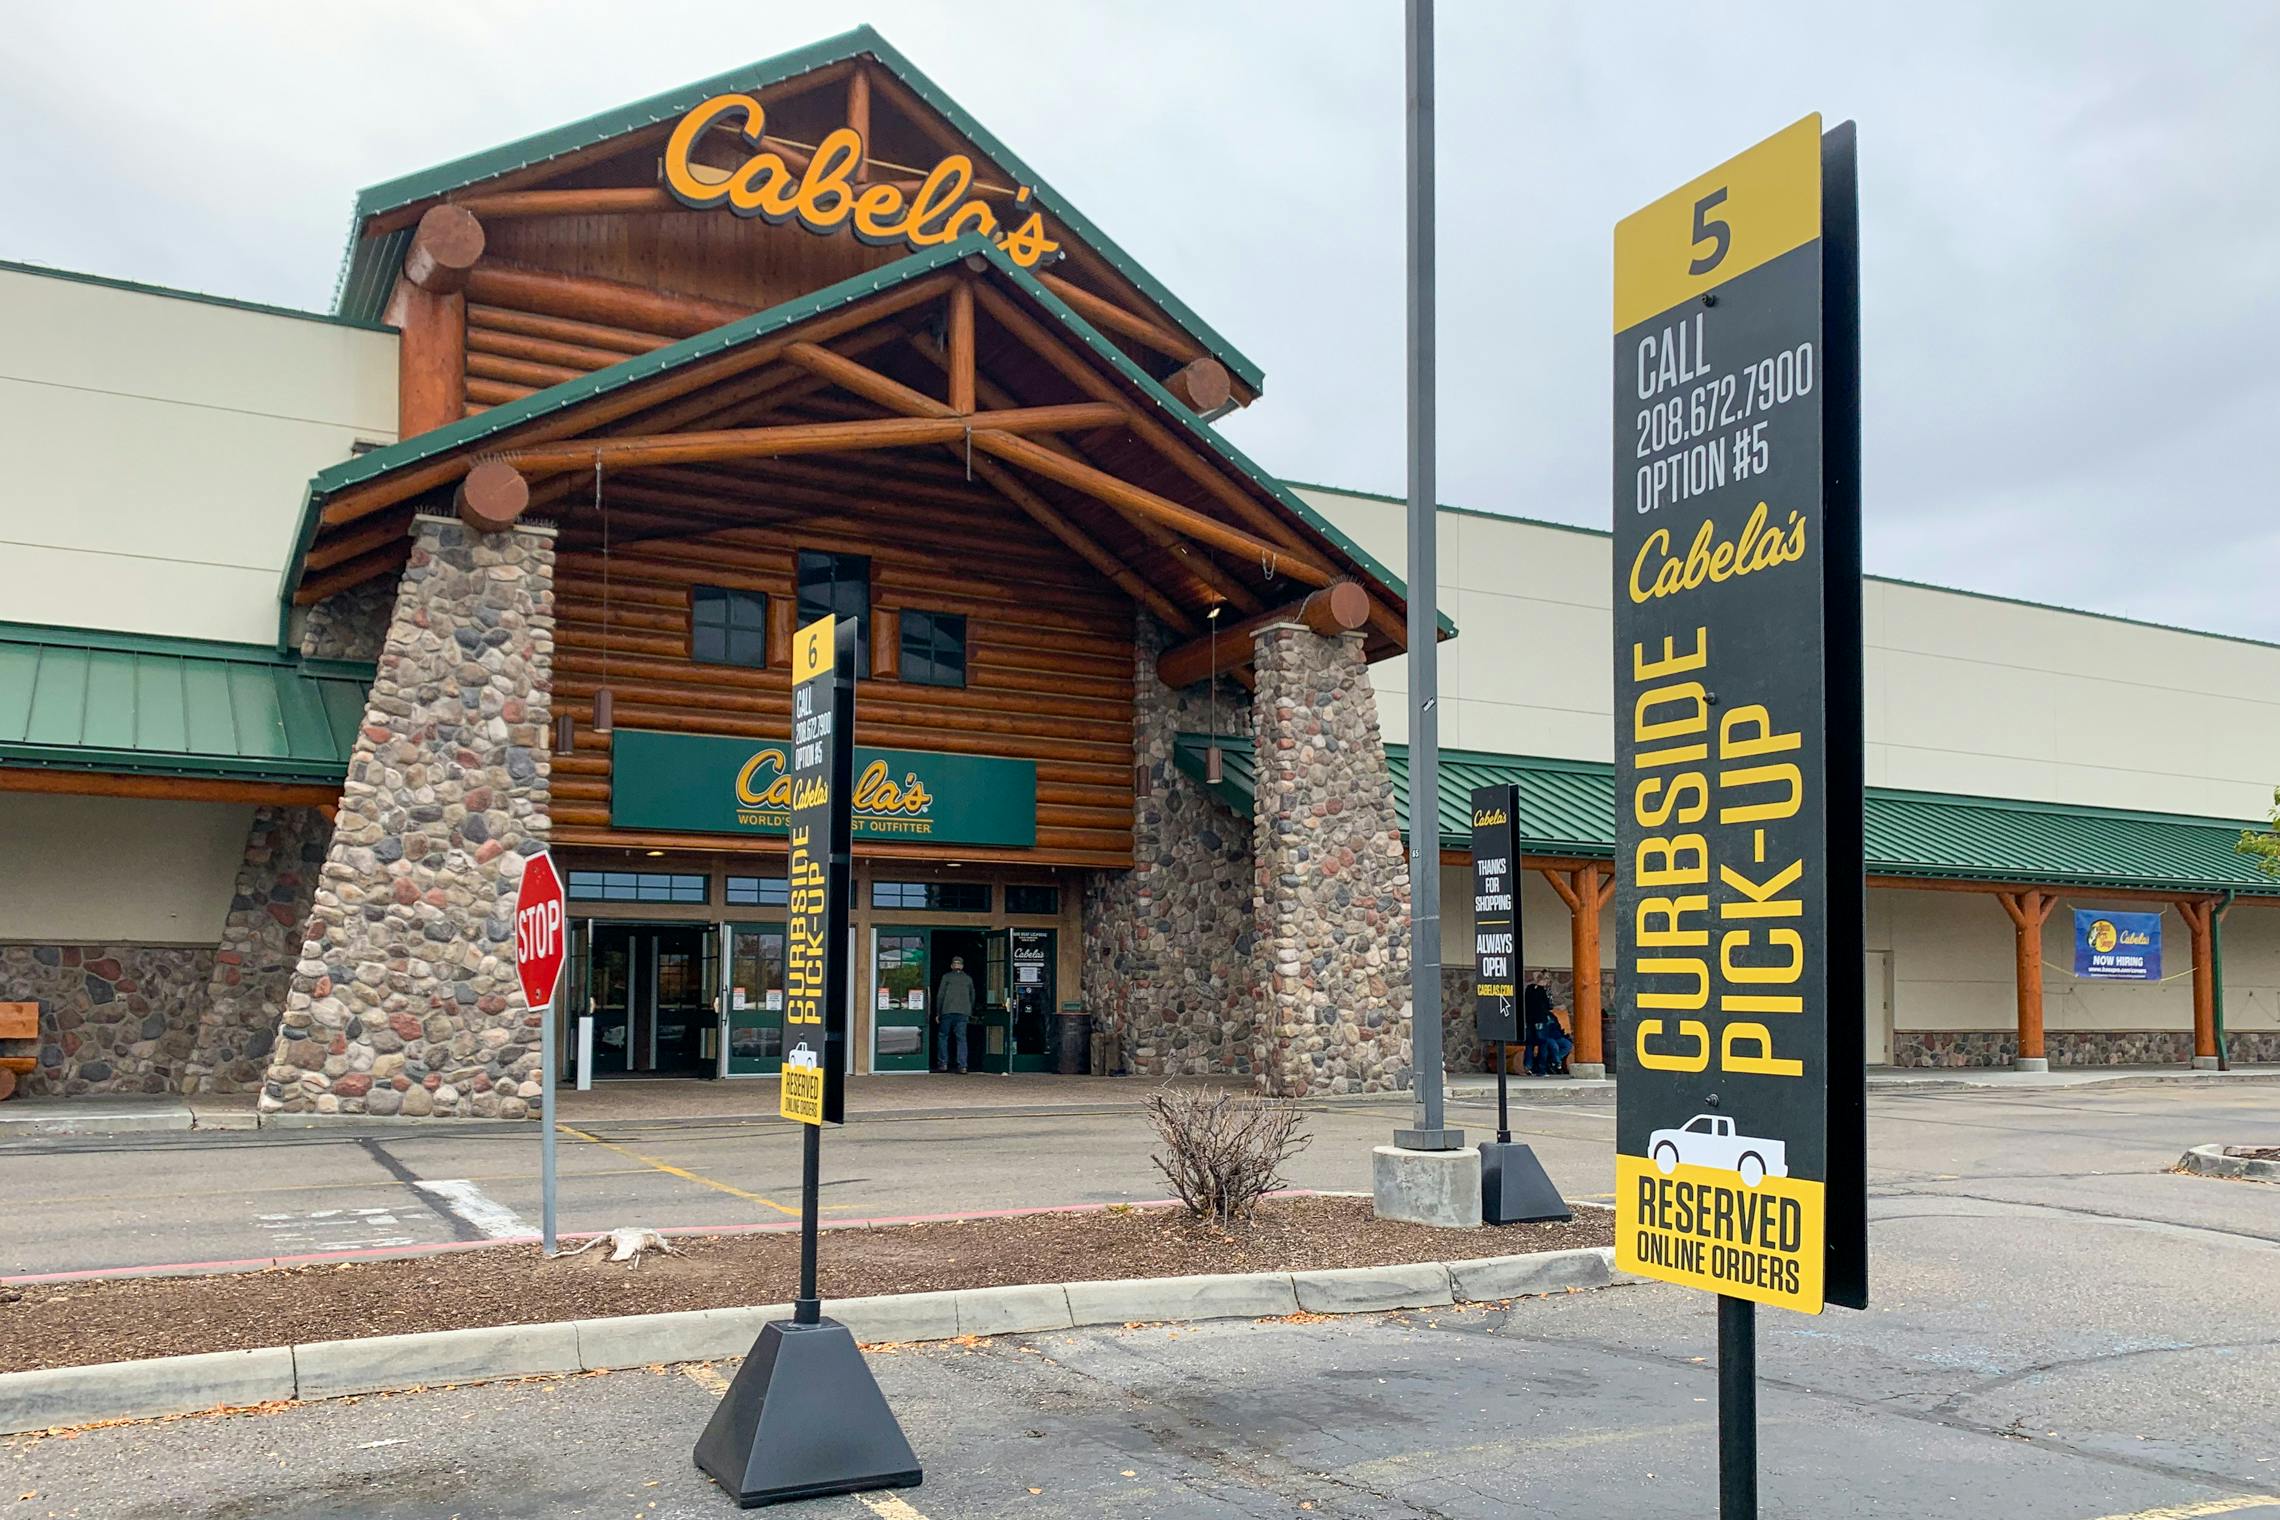 Cabela's storefront with curbside pickup sign in the parking lot.